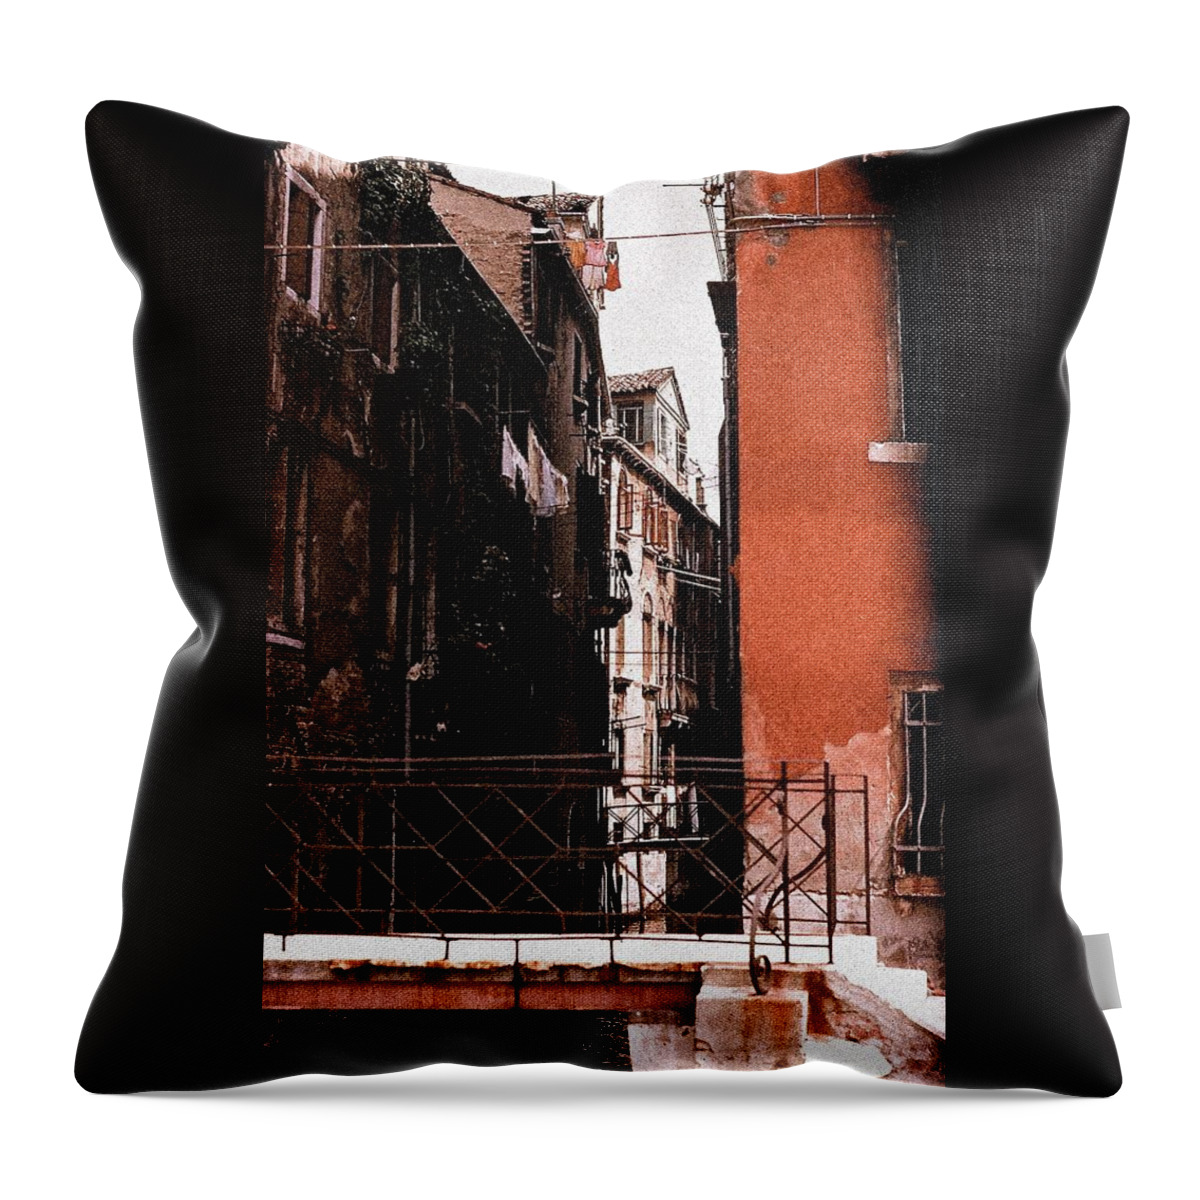 Venice Throw Pillow featuring the photograph A Chapter In Venice by Ira Shander